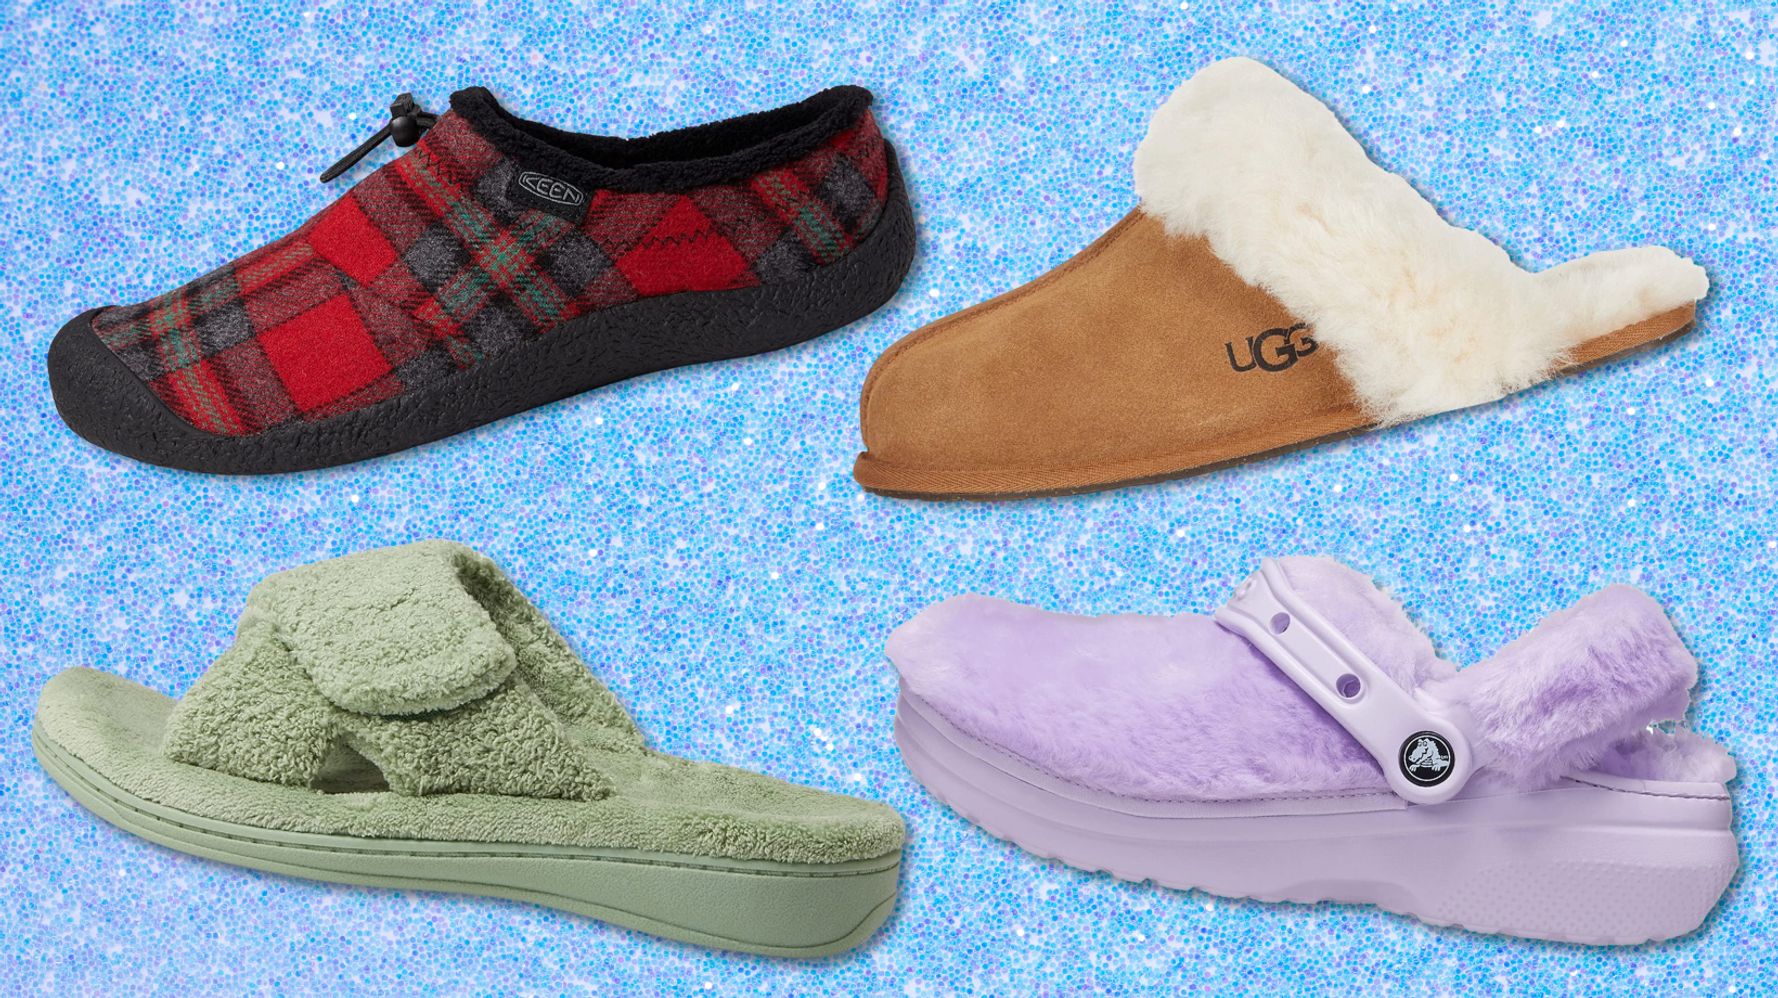 Melbourne Hijgend visueel 13 Comfy Slippers From Zappos That Make Perfect Gifts | HuffPost Life